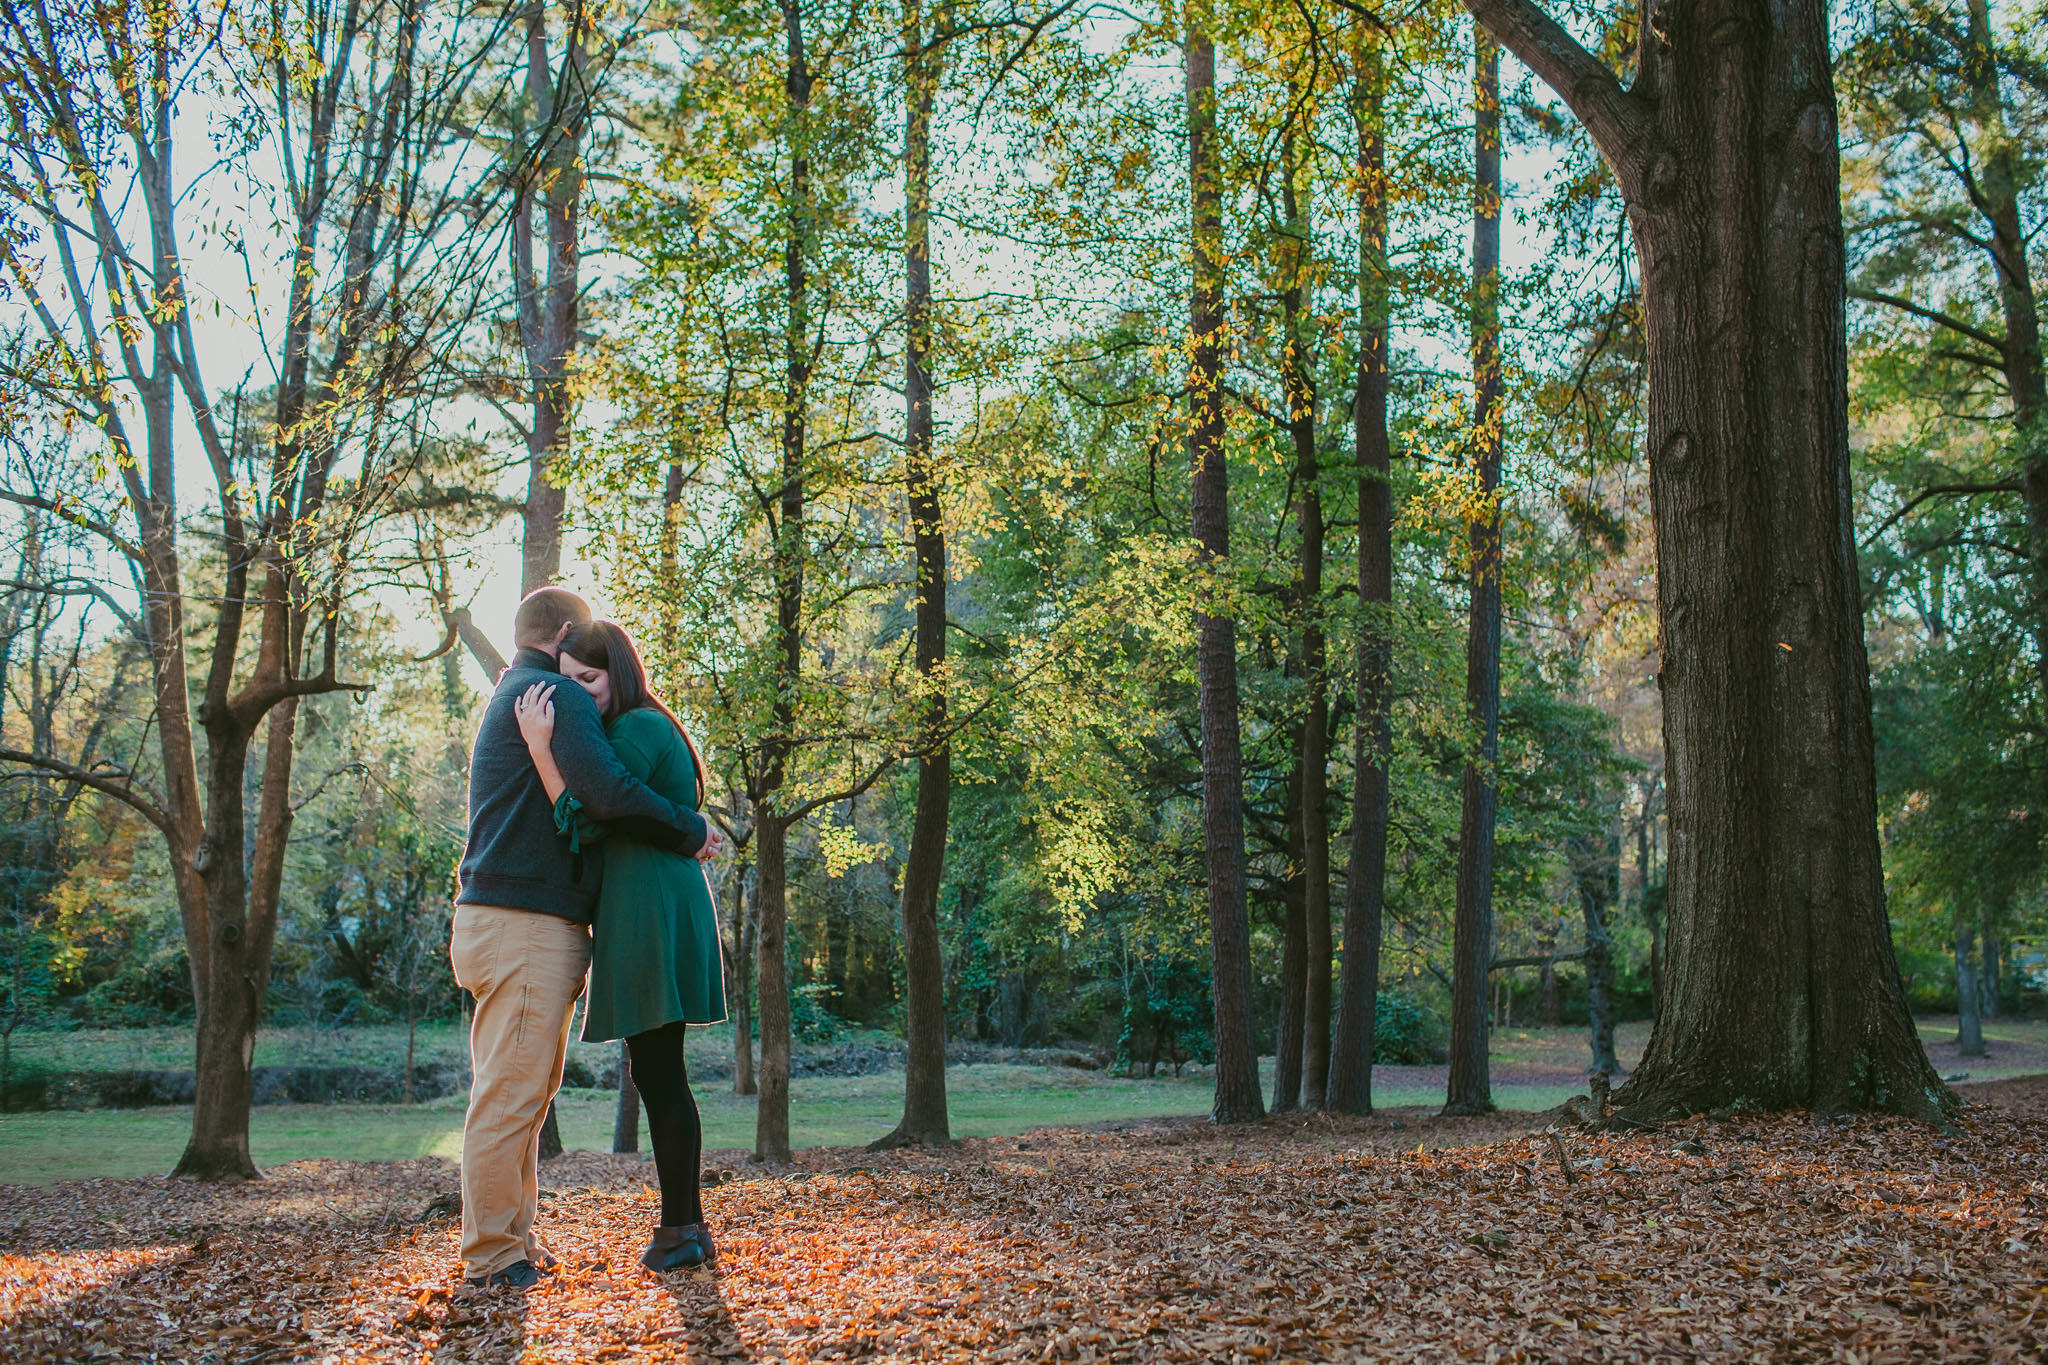 A beautiful engagement session at Mac Anderson Park in Statesville